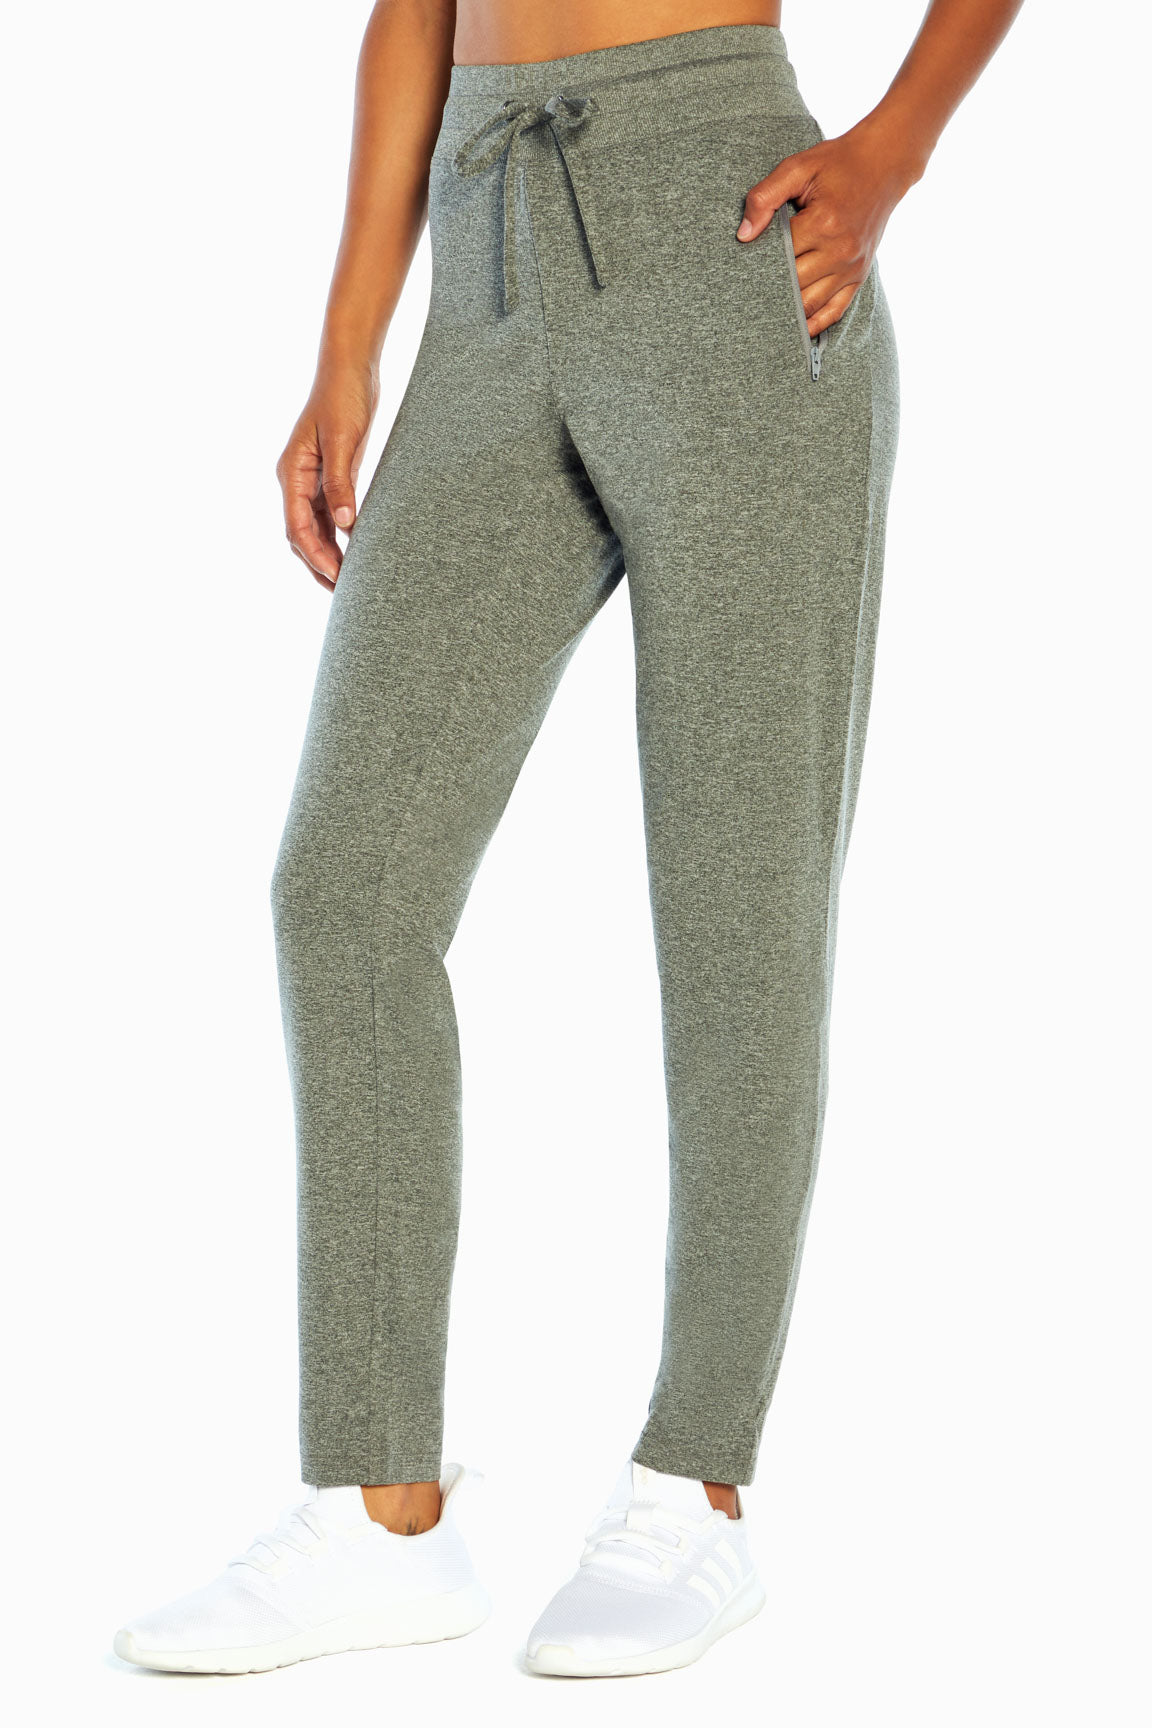 JILL YOGA YOUTH LIVE IN JOGGER - Bodythings